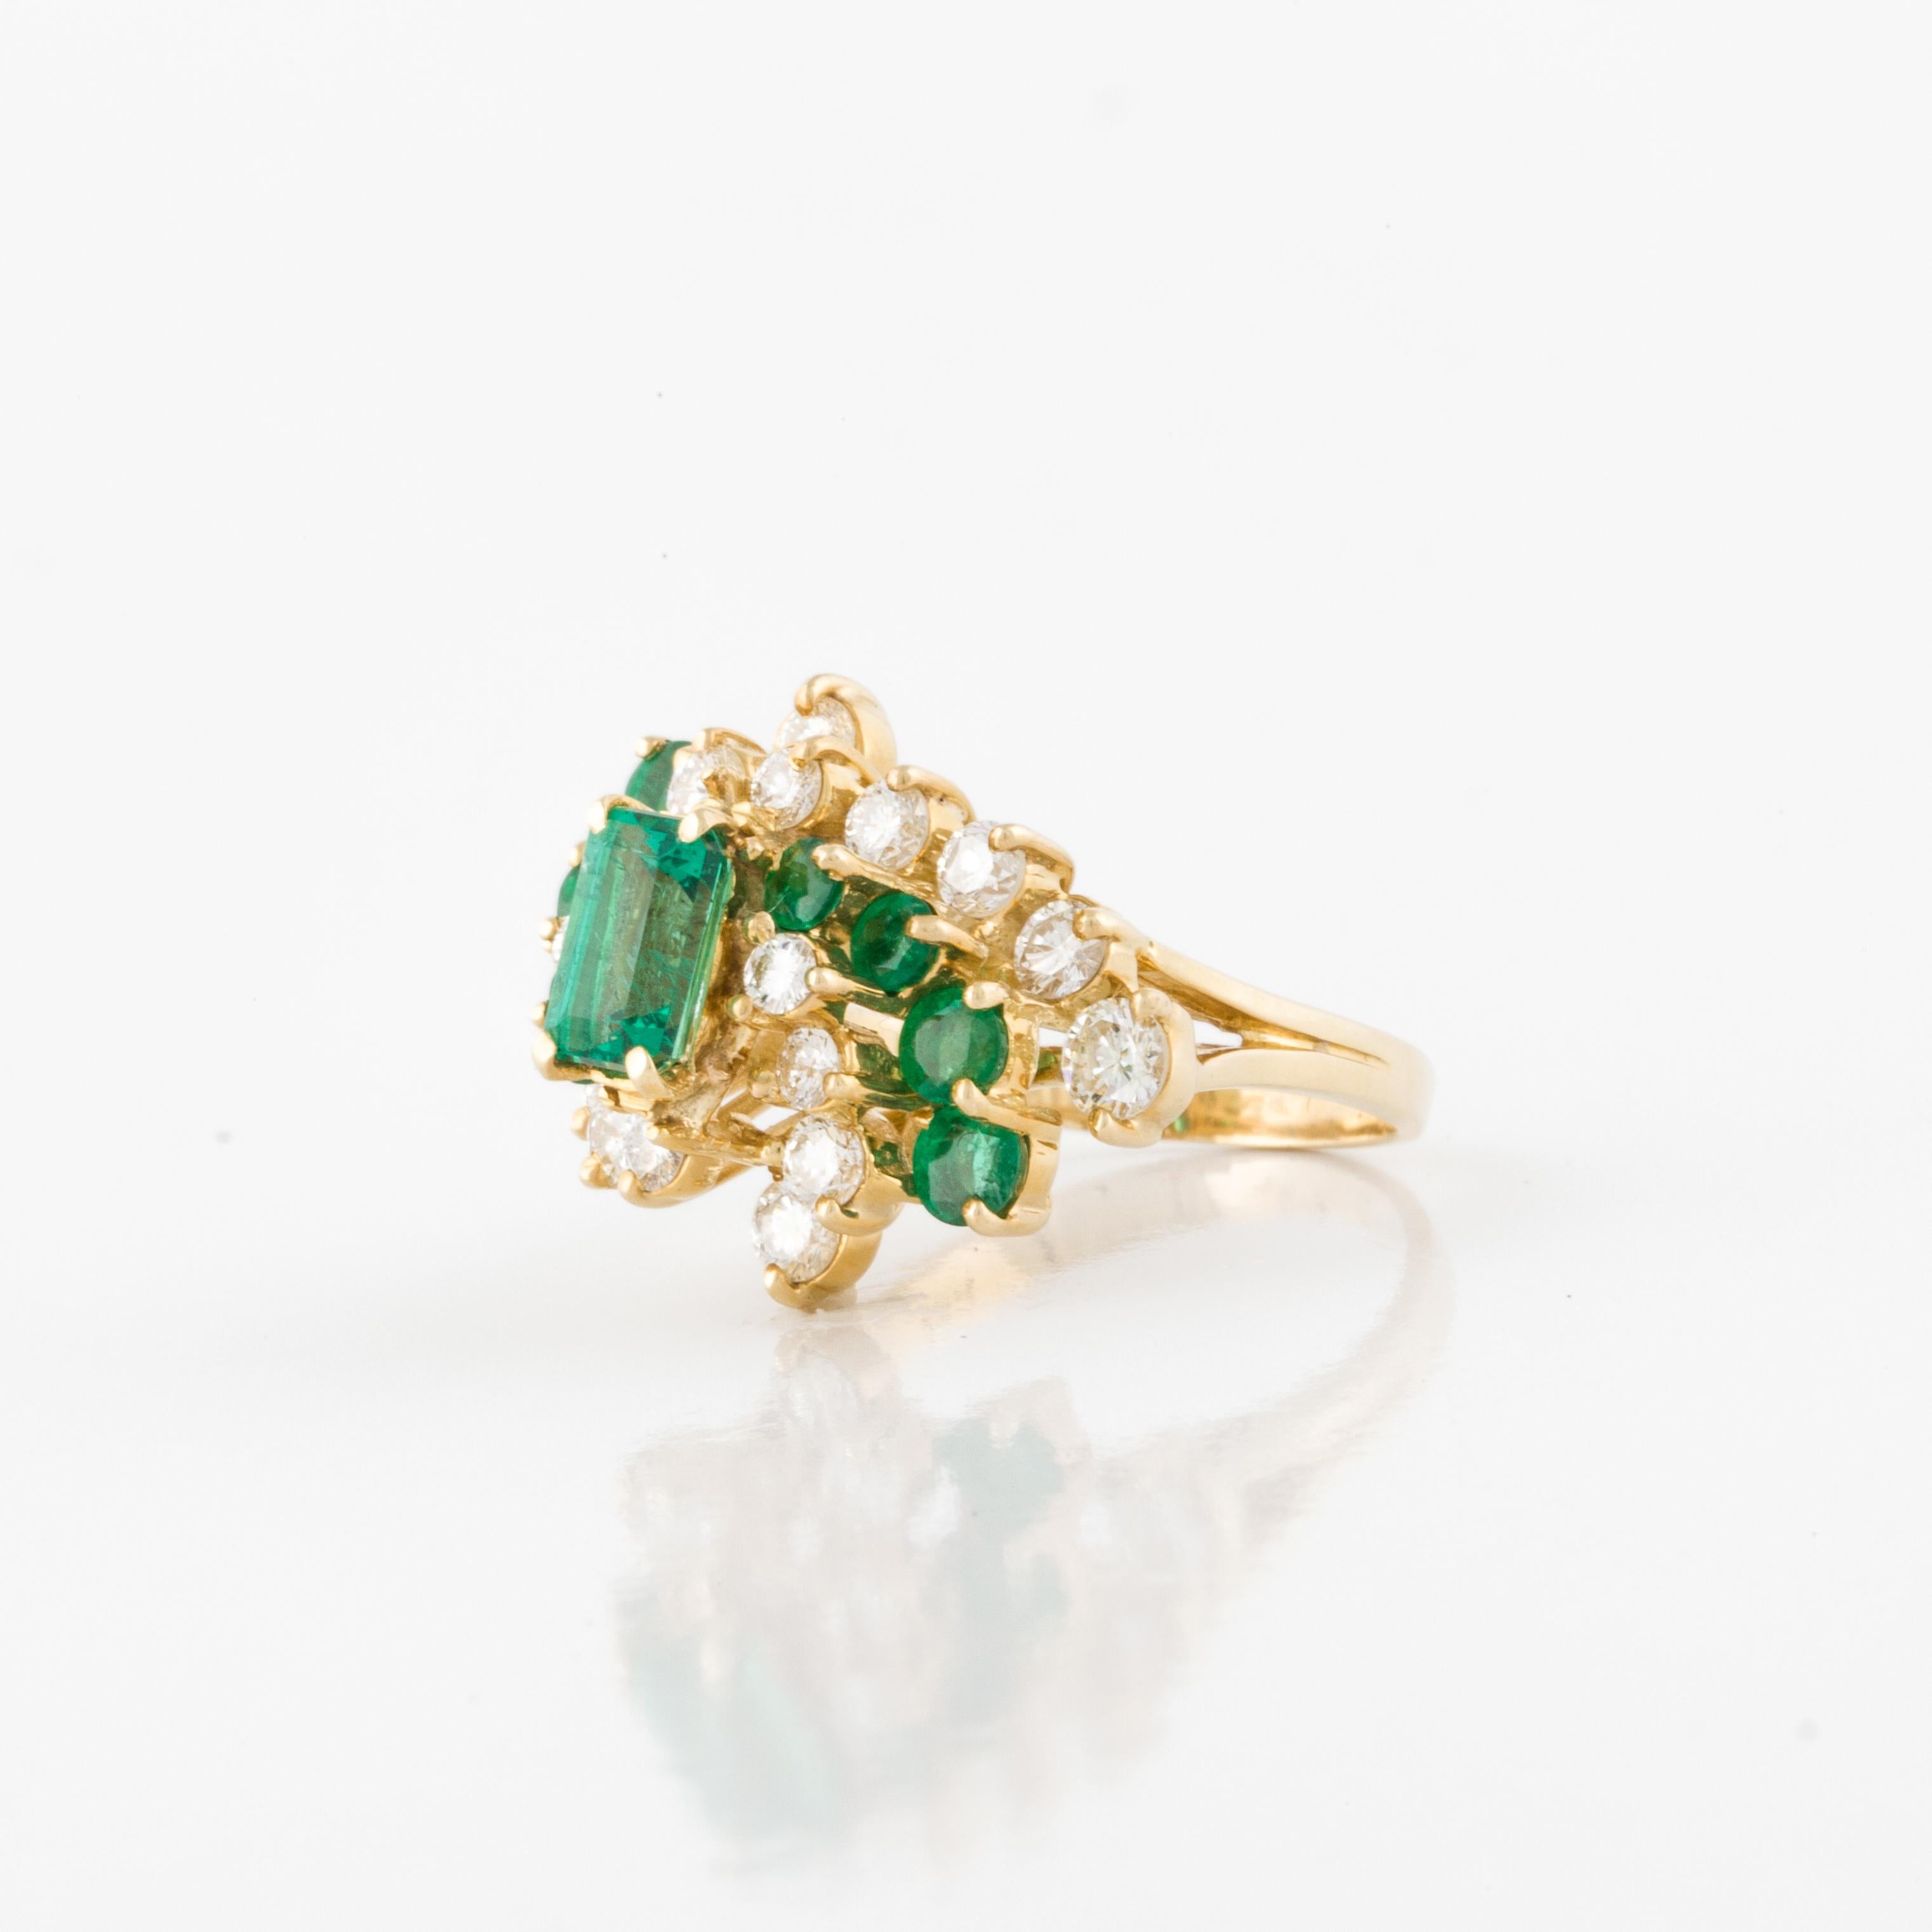 18K yellow gold diamond and emerald ring in a waterfall style.  The ring features one emerald-cut emerald and eight round emeralds accented by eighteen round diamonds totaling 1.25 carats; G-H color and VVS-VS clarity. The ring is currently a size